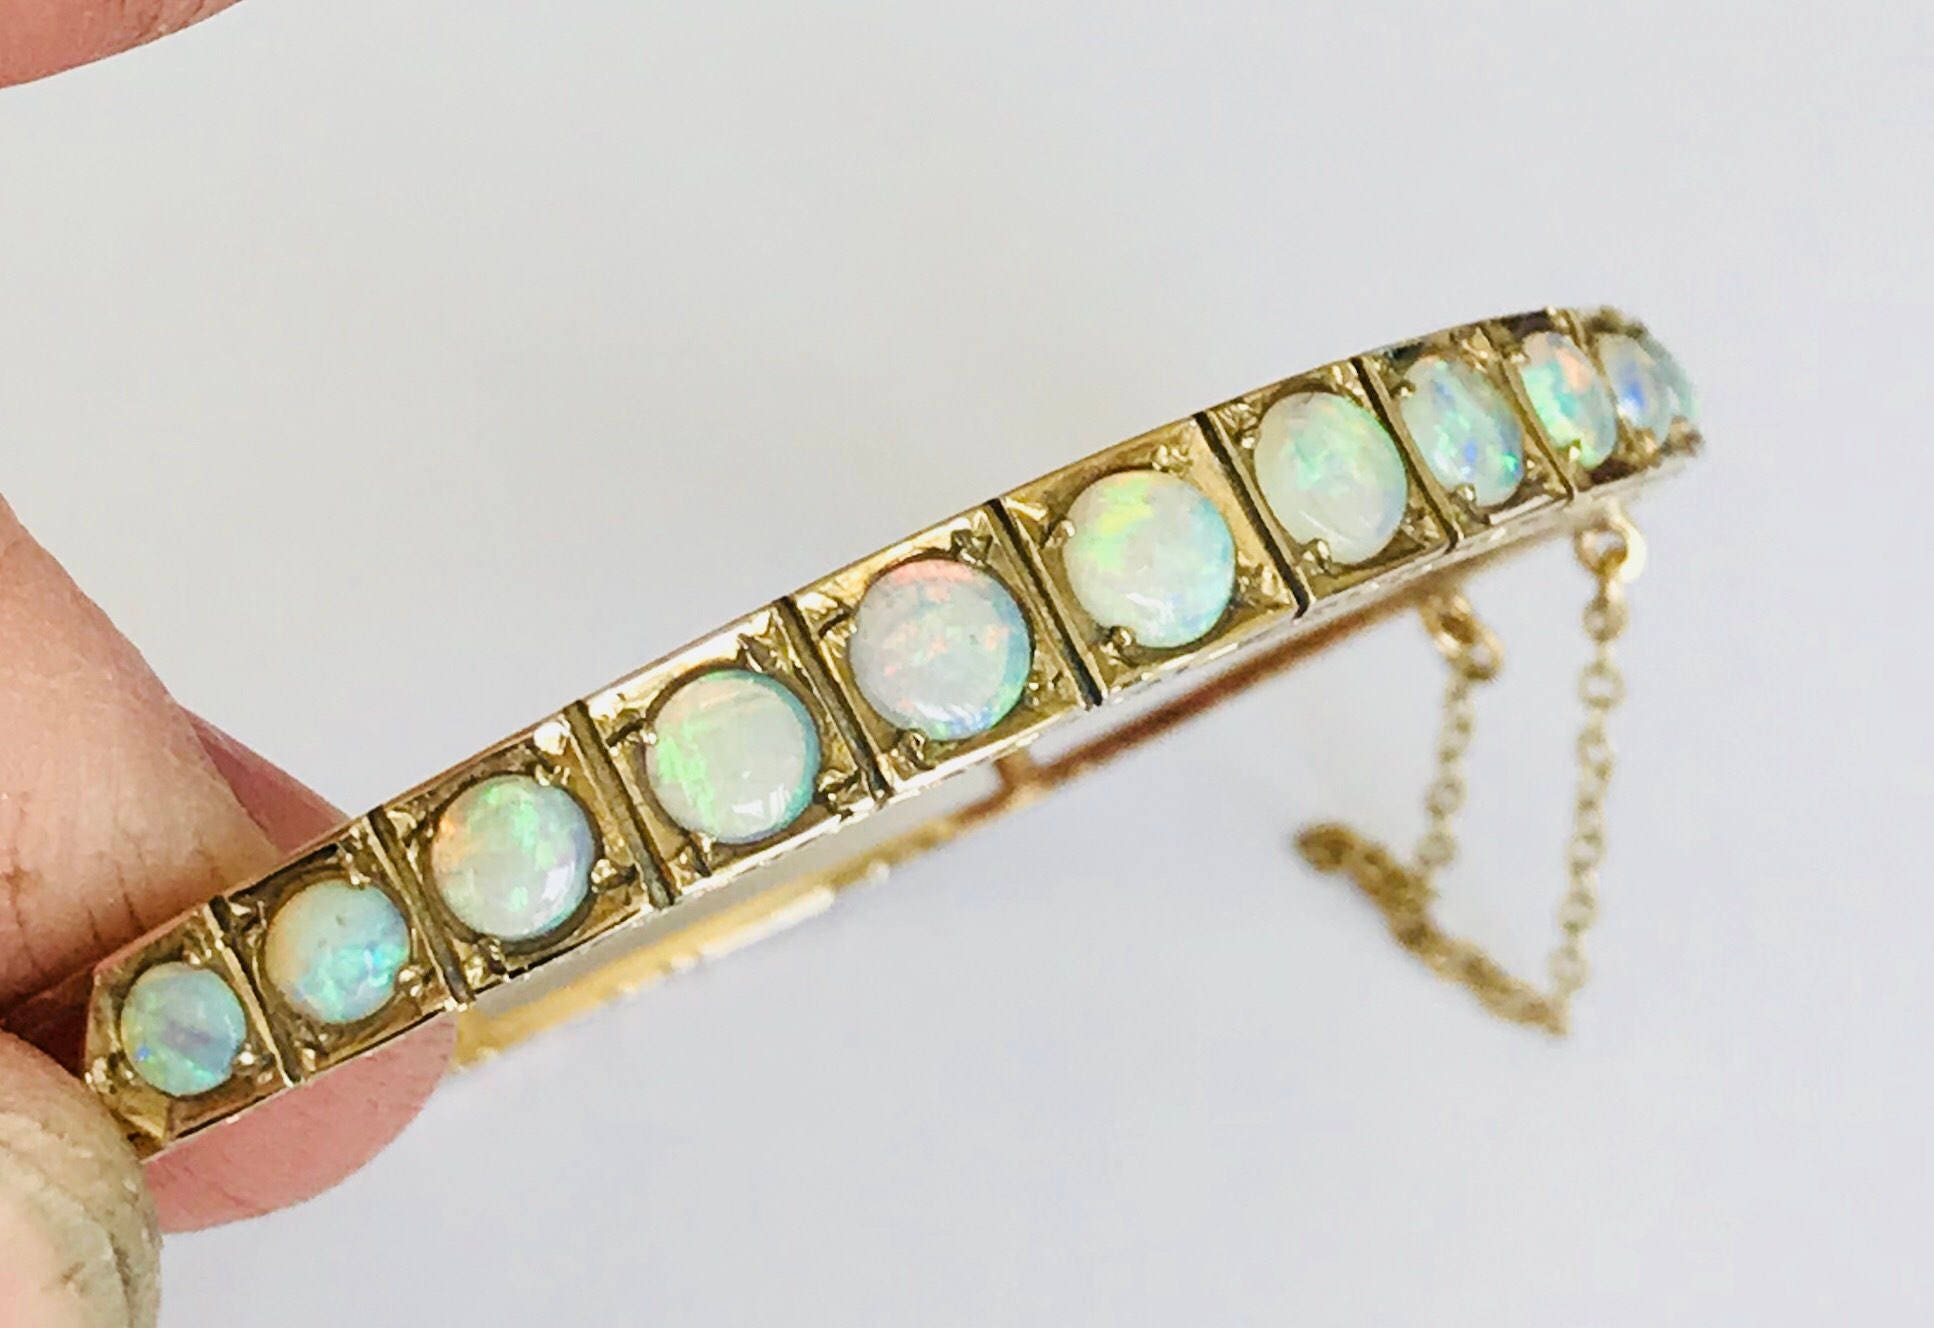 Absolutely fabulous vintage 9ct gold Opal bangle in excellent condition